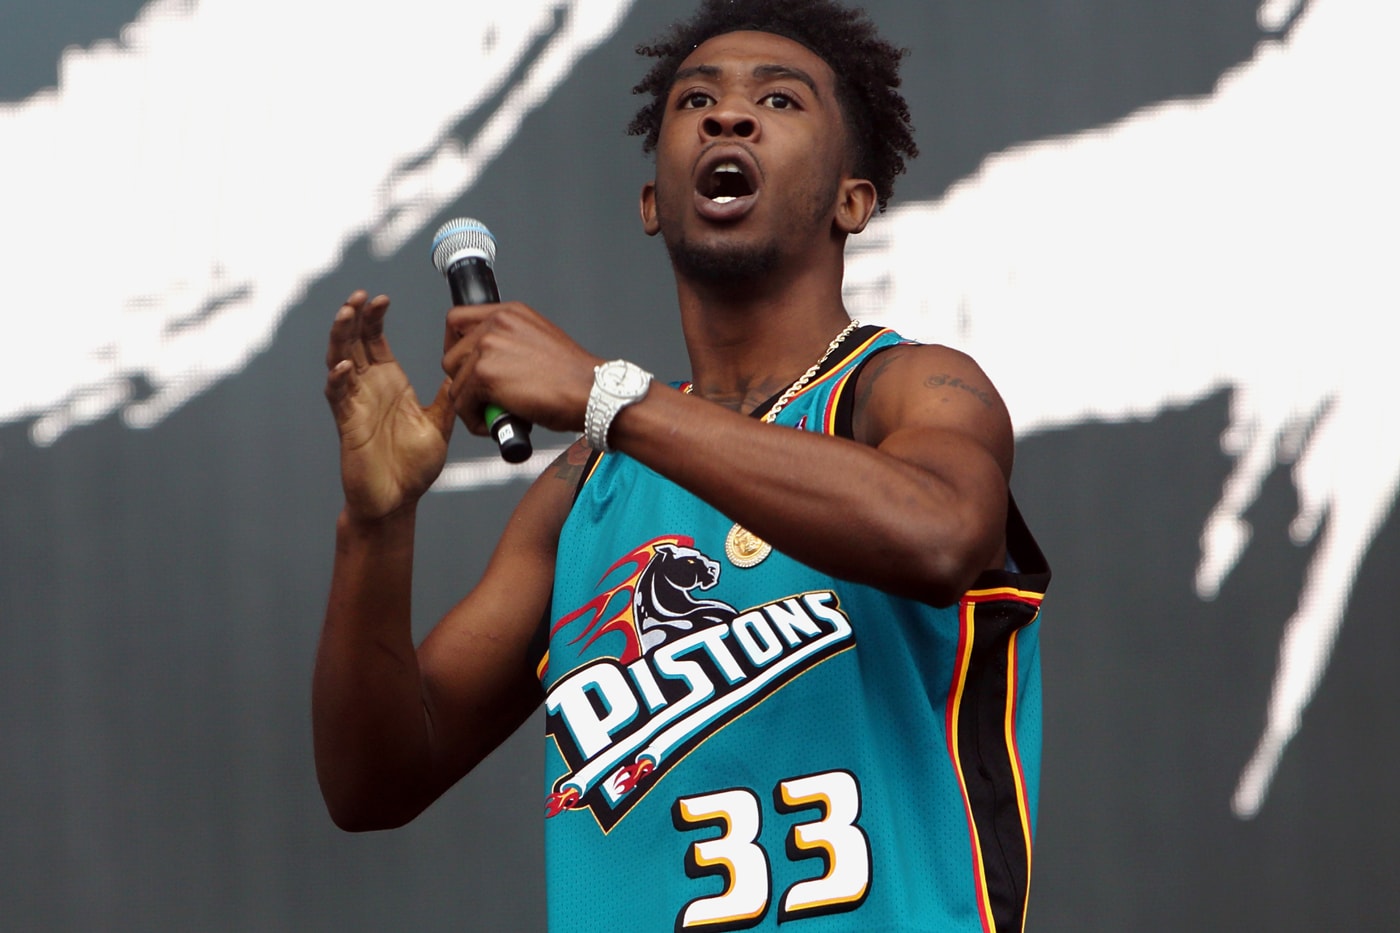 Desiigner is G.O.O.D. Music's Newest Addition, Confirmed by Kanye West